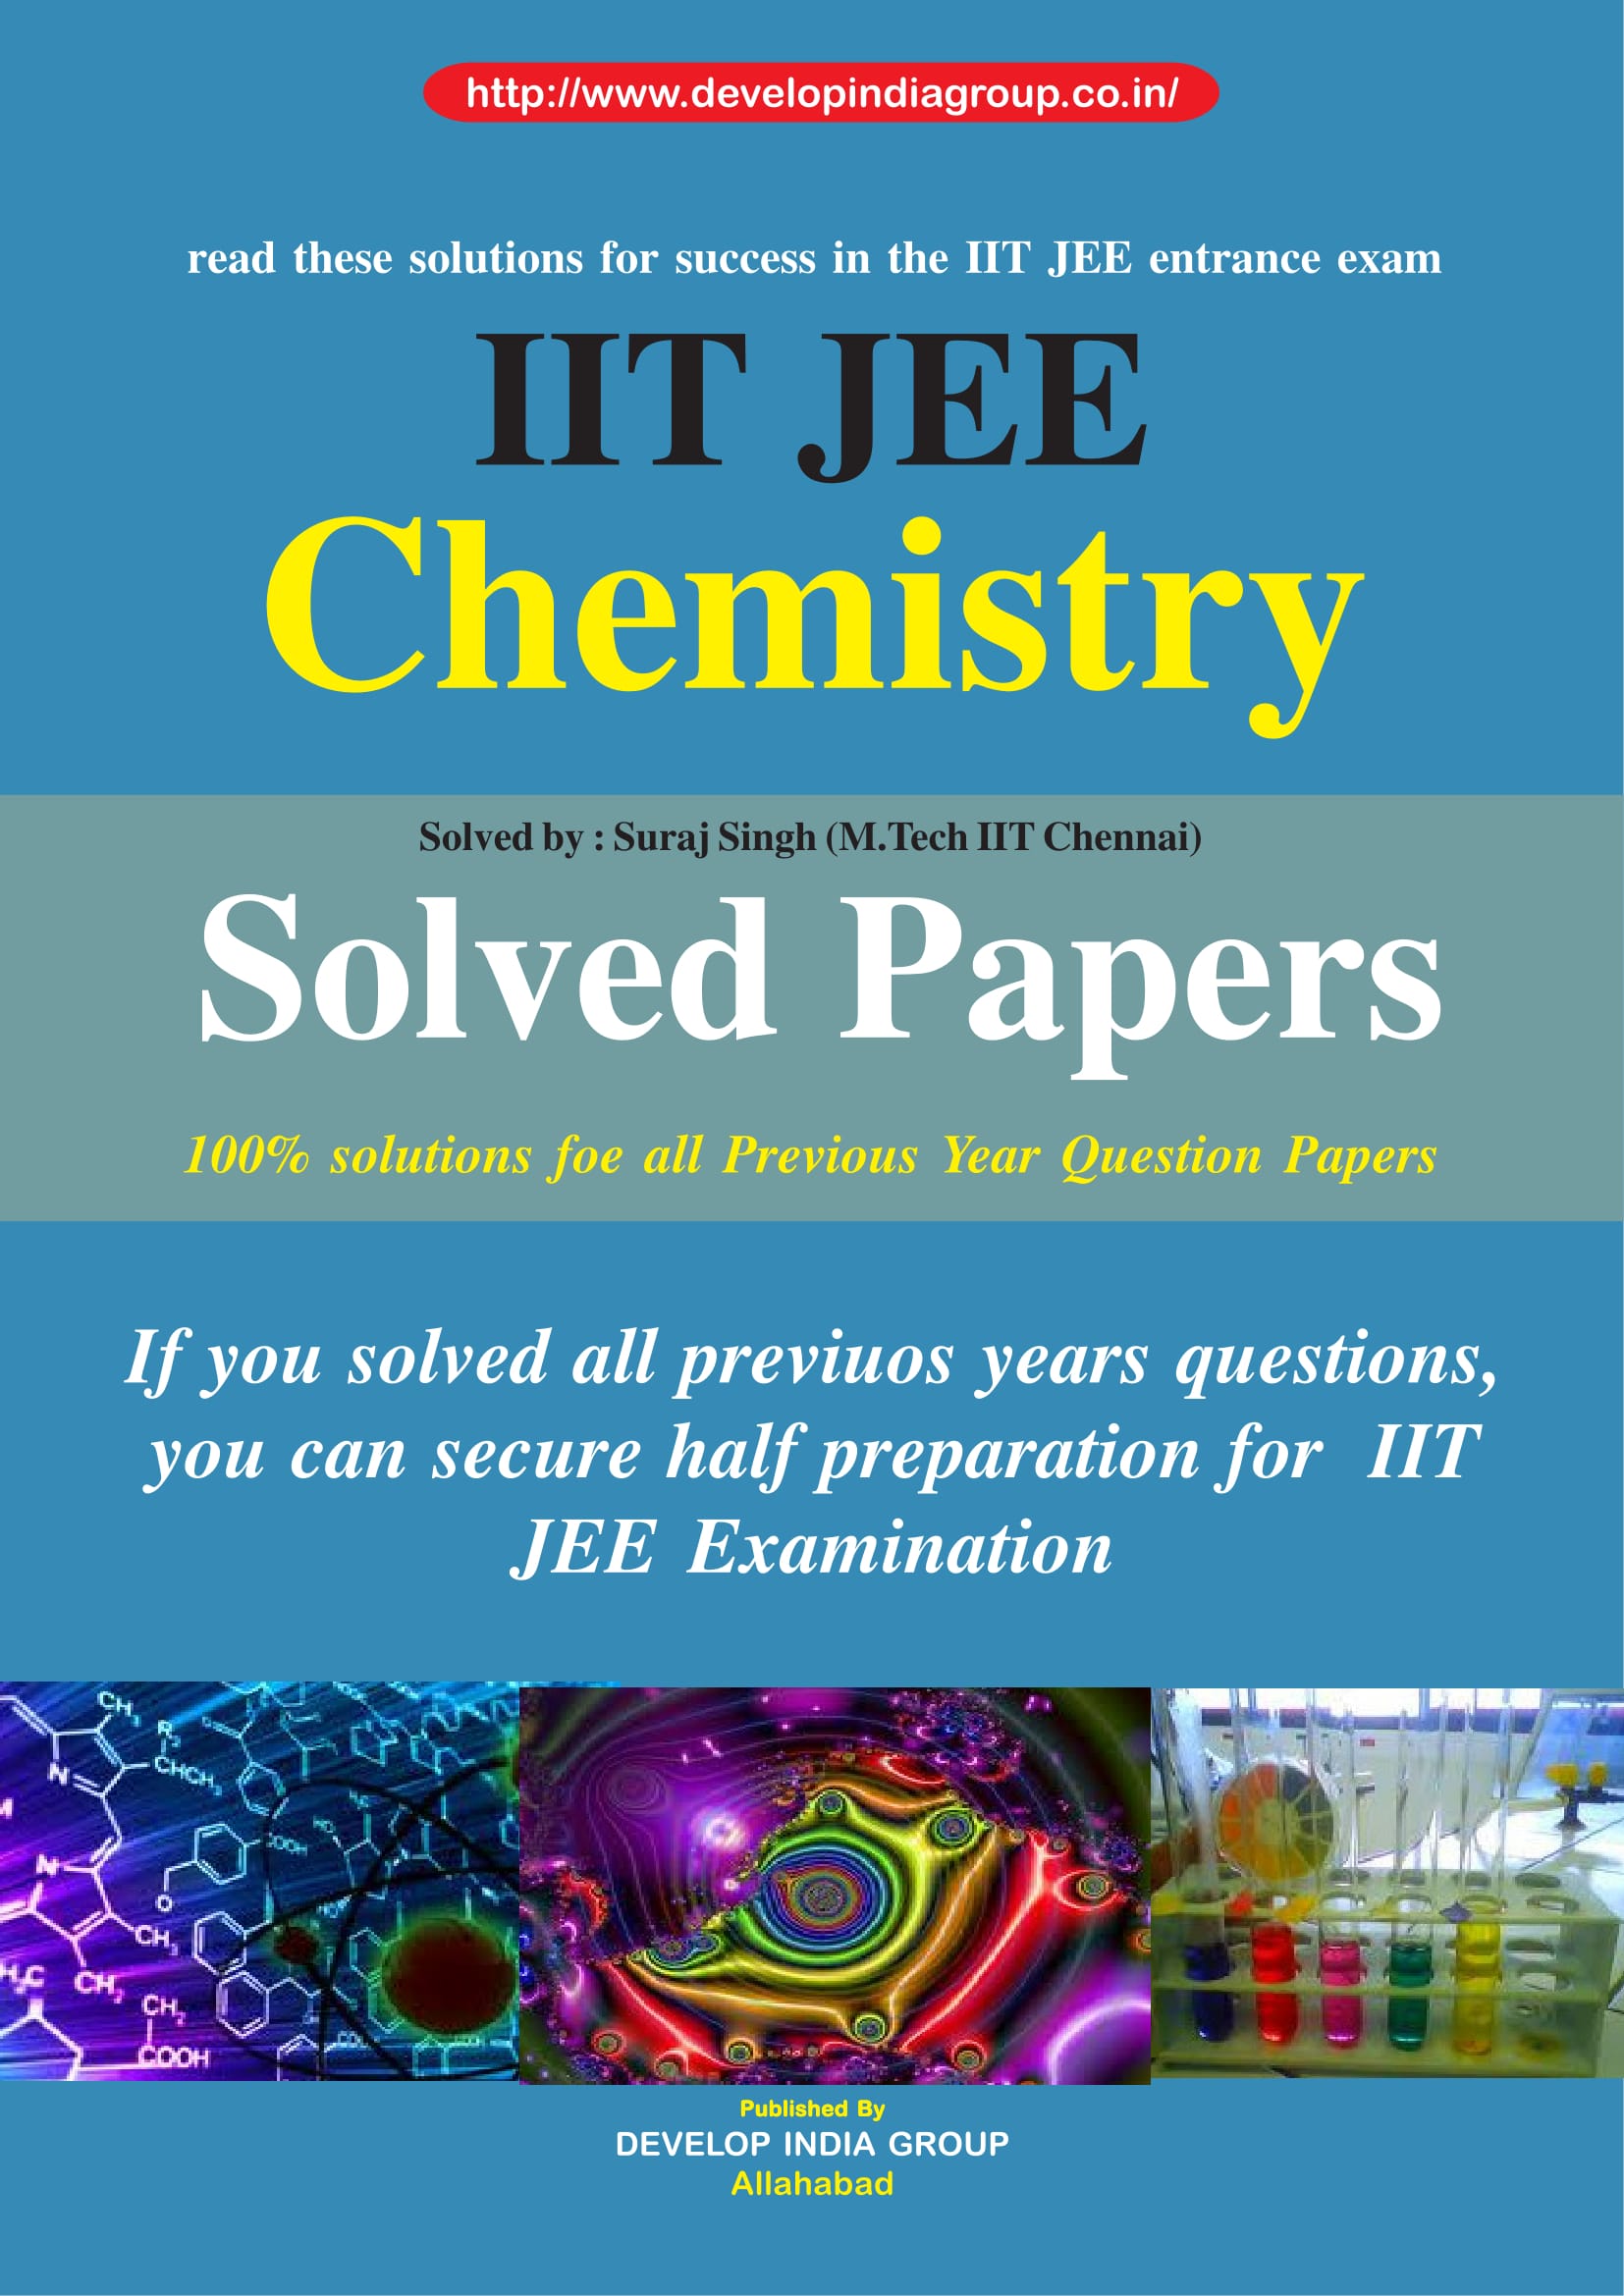 IIT_JEE_solved_paper_for_Chemistry